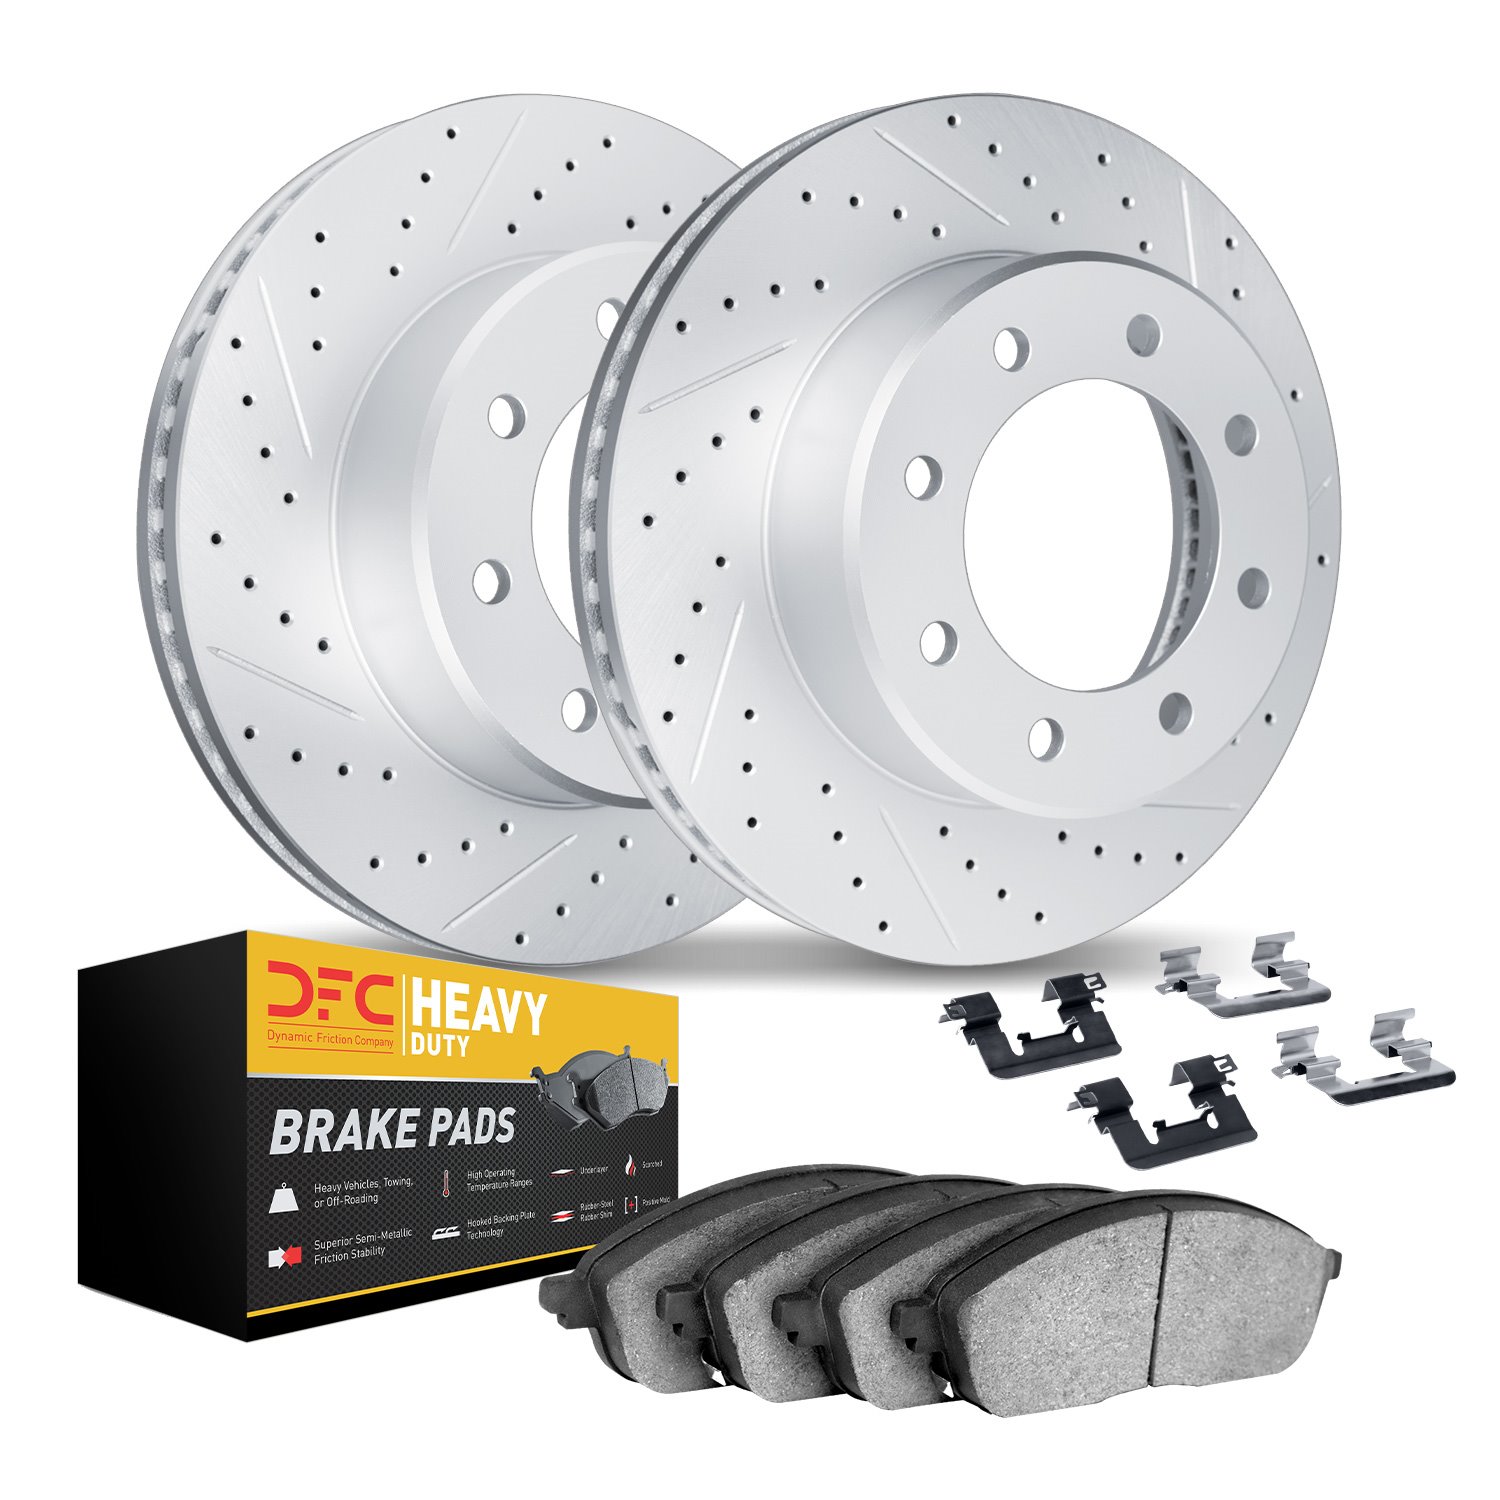 2212-99122 Geoperformance Drilled/Slotted Rotors w/Heavy-Duty Pads Kit & Hardware, 1999-2005 Ford/Lincoln/Mercury/Mazda, Positio